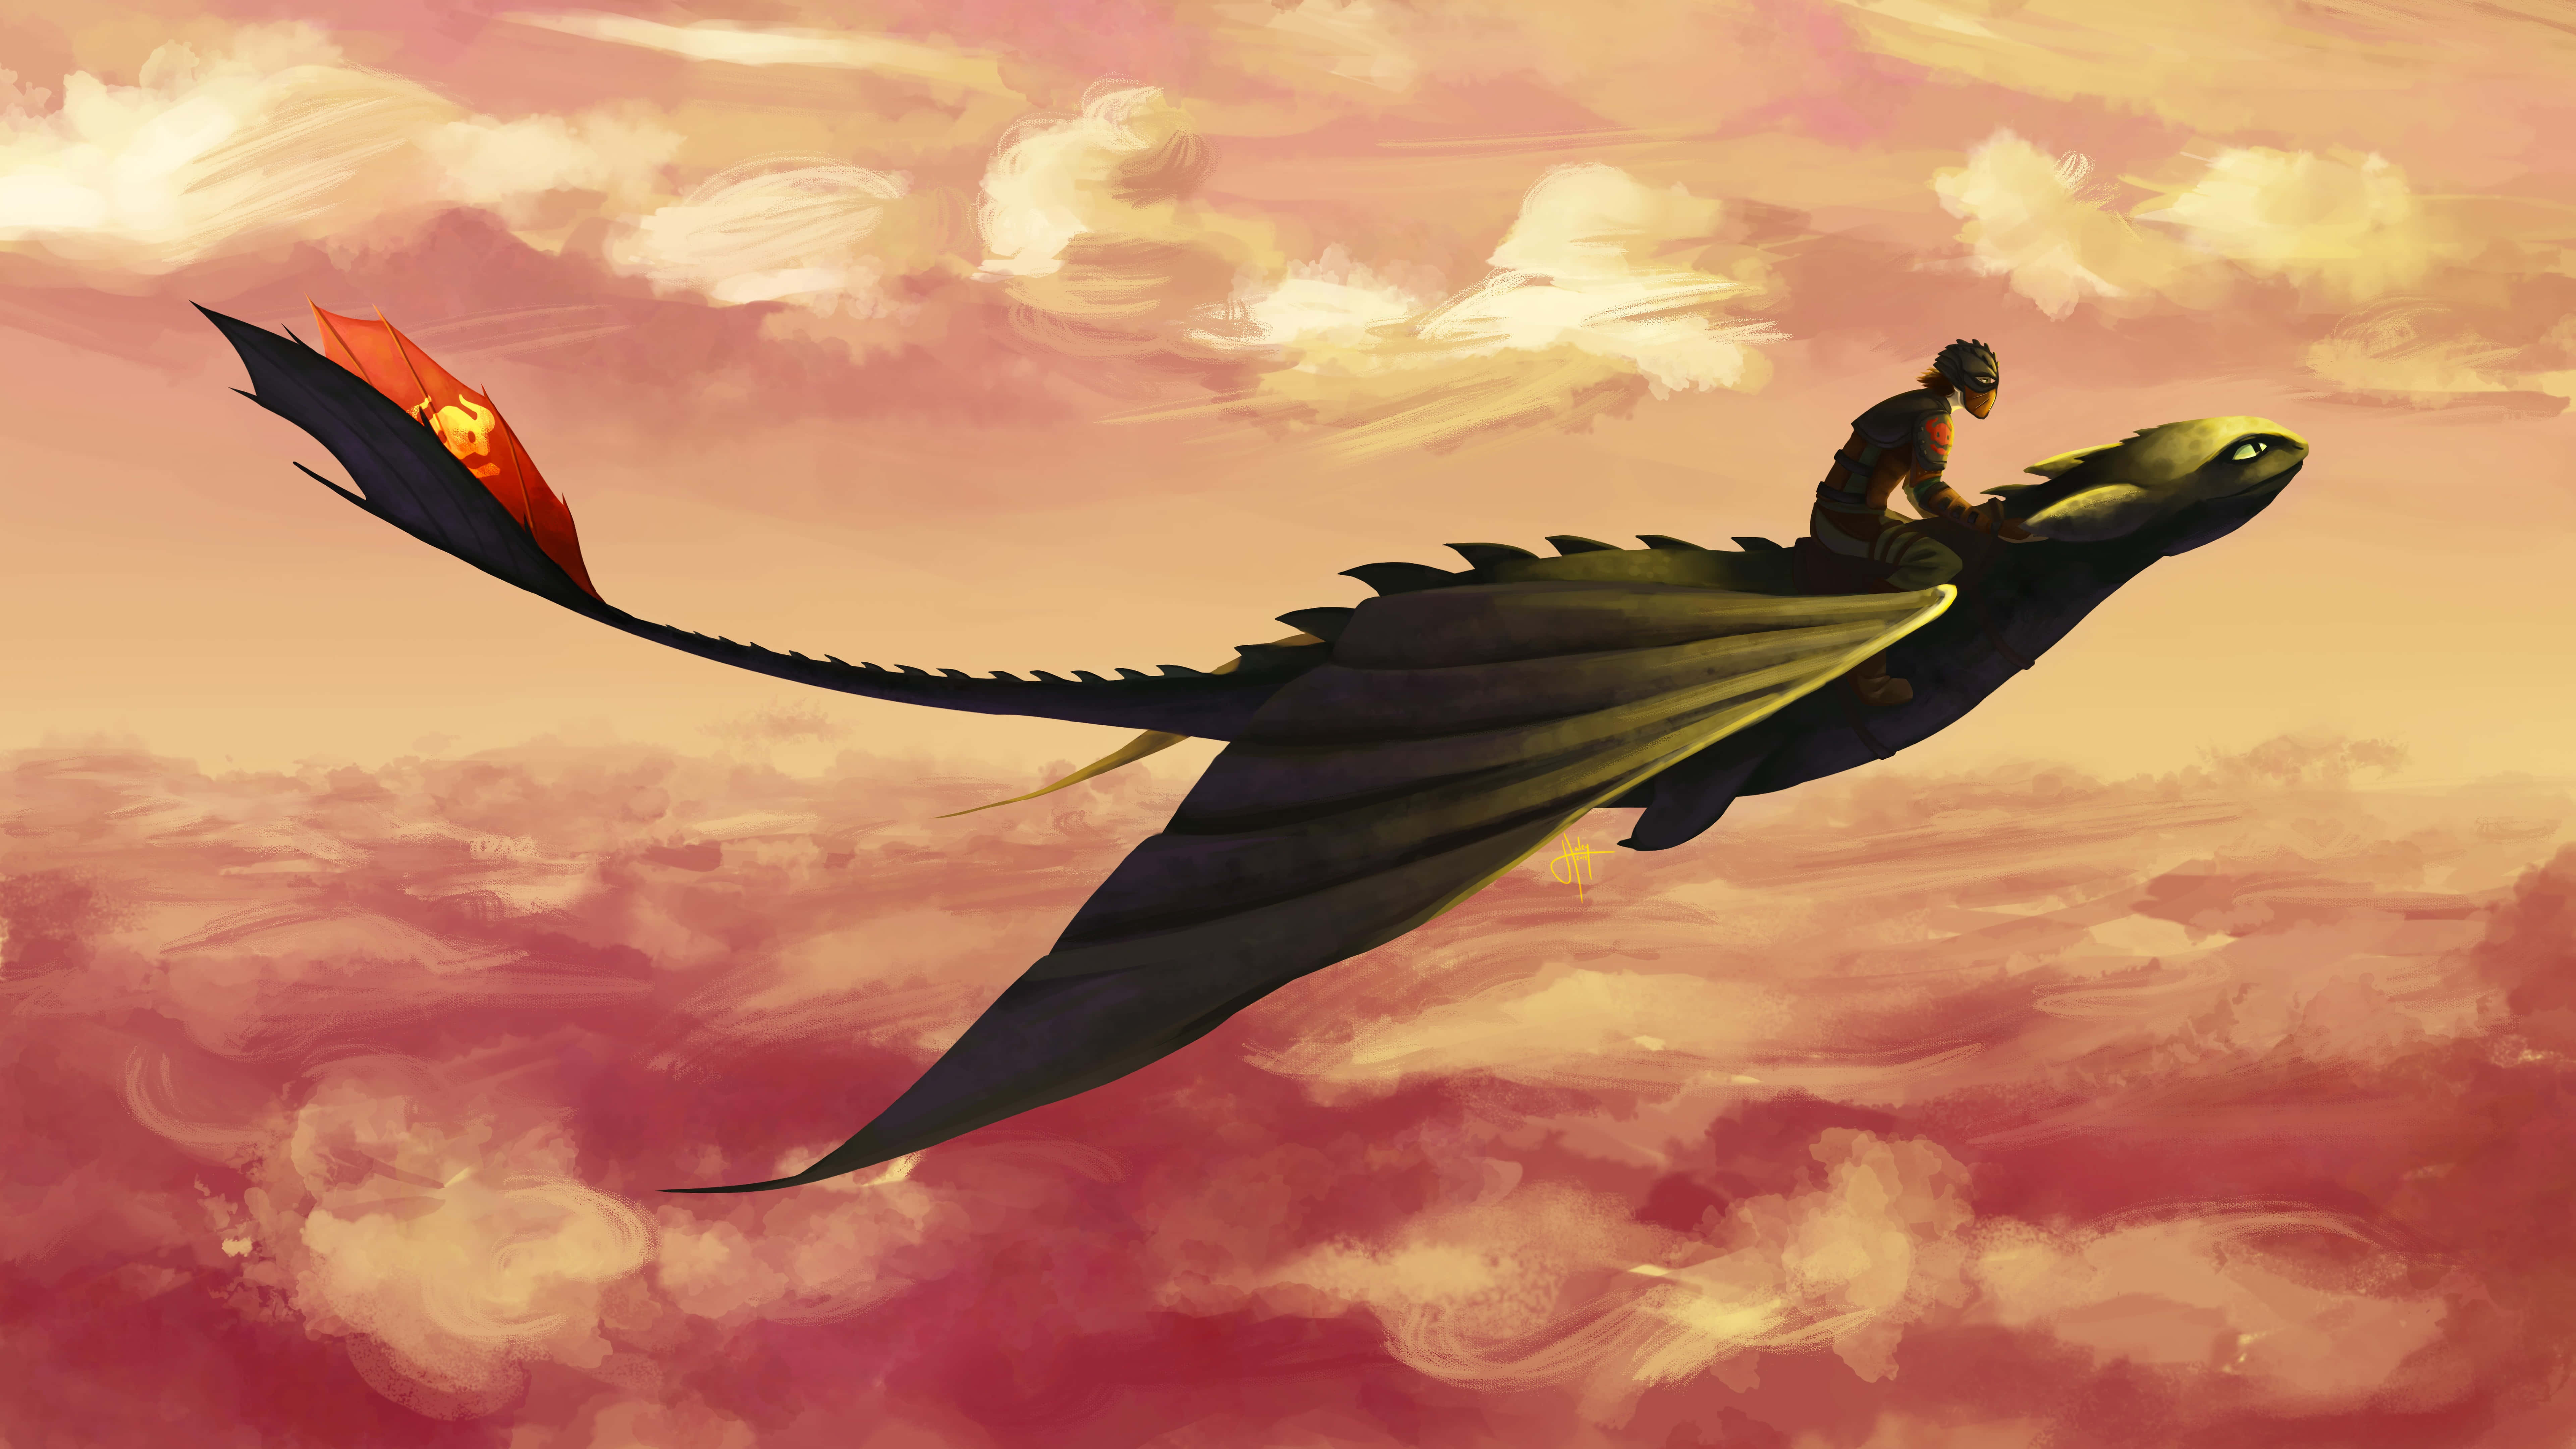 Take Flight with Toothless and Hiccup in How to Train Your Dragon! Wallpaper